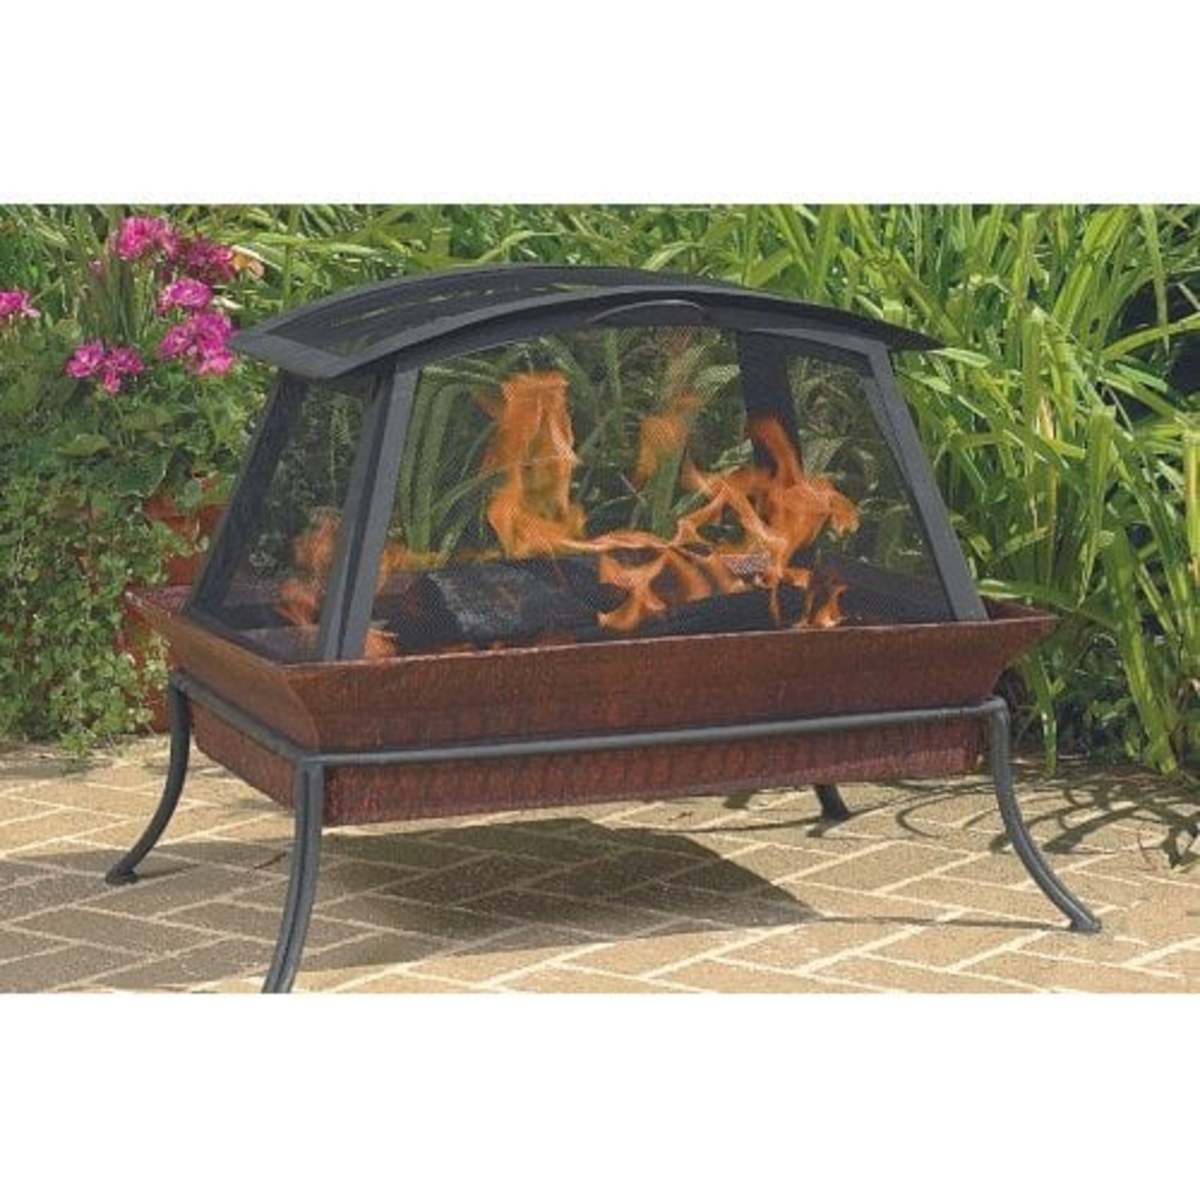 Outdoor fireplaces come in all sorts of designs.